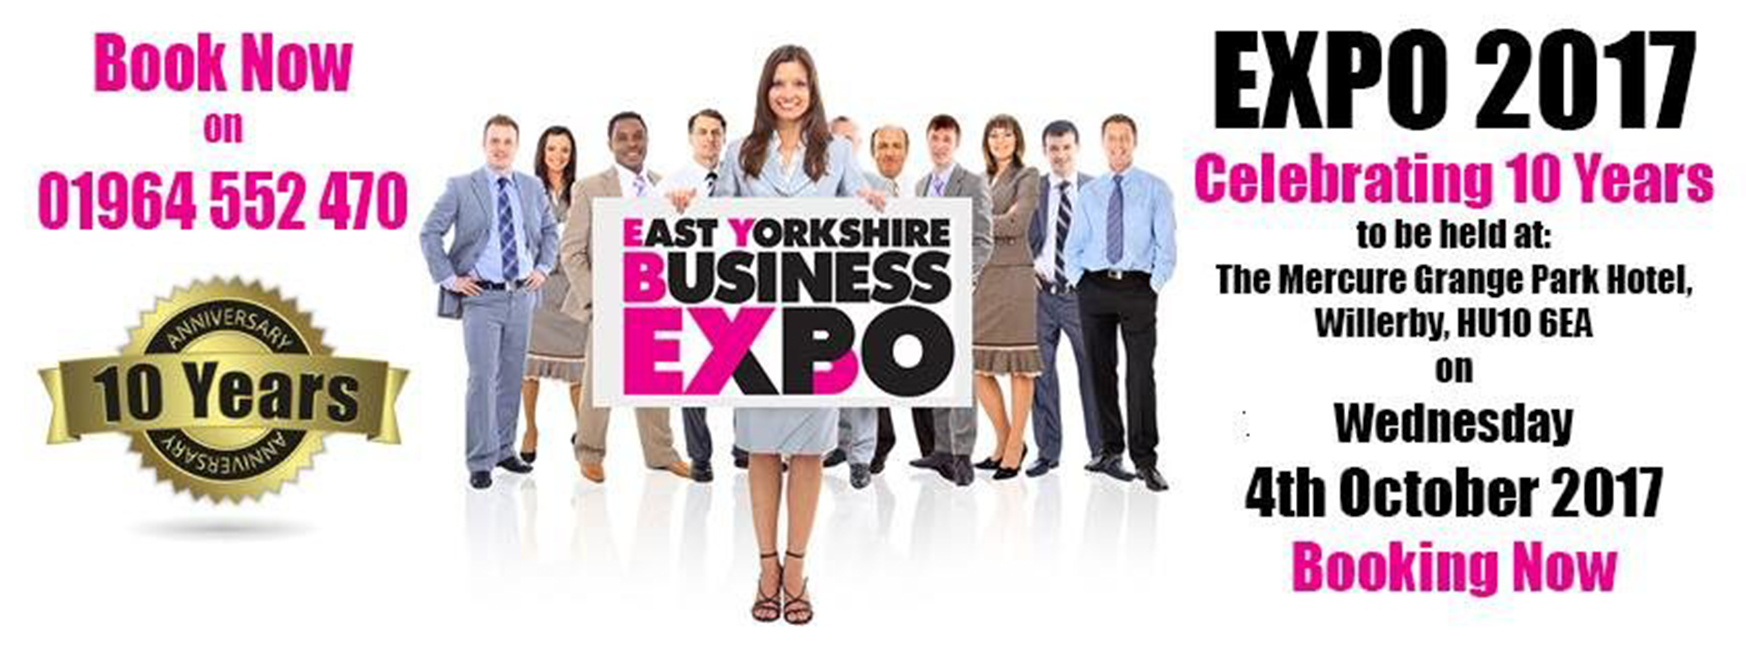 East Yorkshire Business Expo